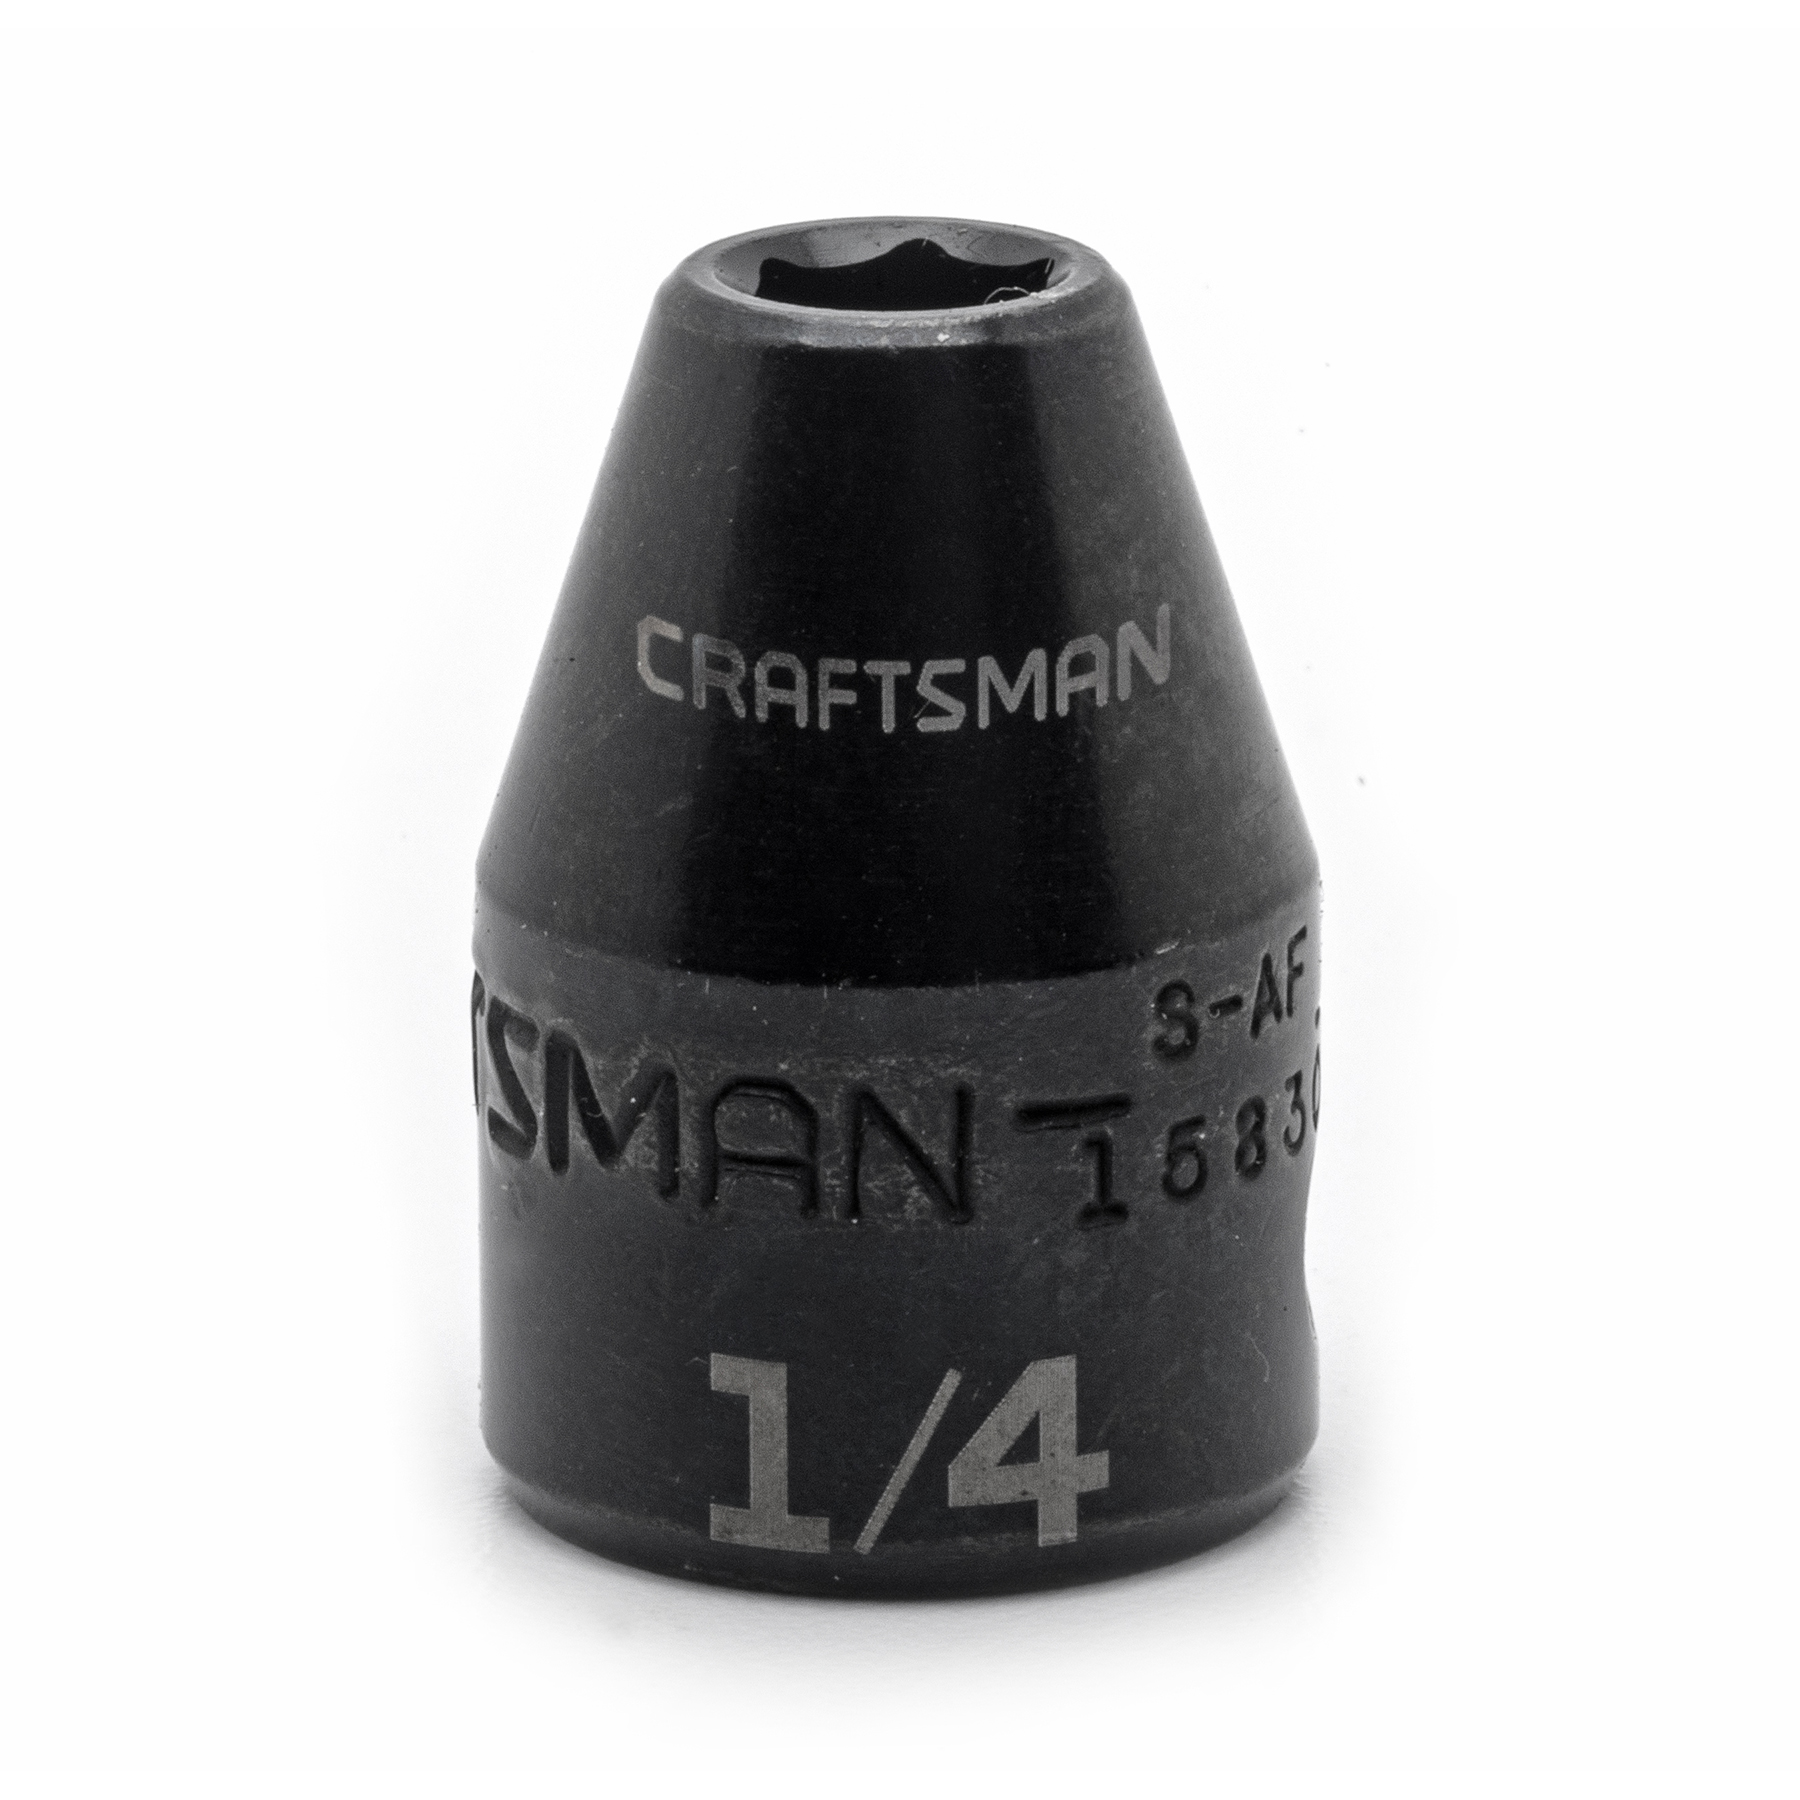 Craftsman 1/4 in. 6 pt. 3/8 in. Drive Easy-To-Read Impact Socket